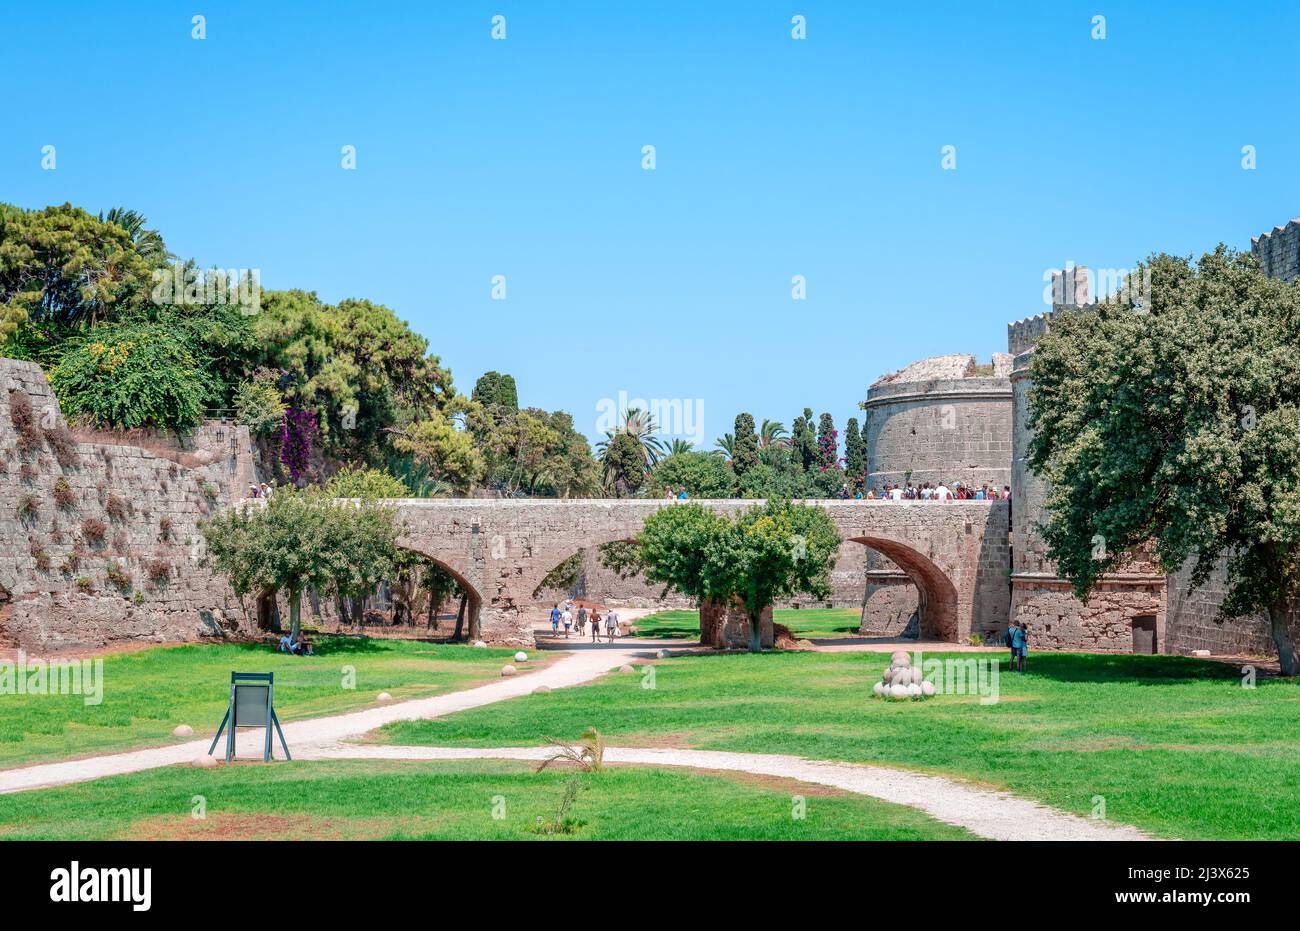 Rhodes, Greece - August 20 2014: View of the medieval moat and the d'Amboise Gate on a sunny summer day. Stock Photo